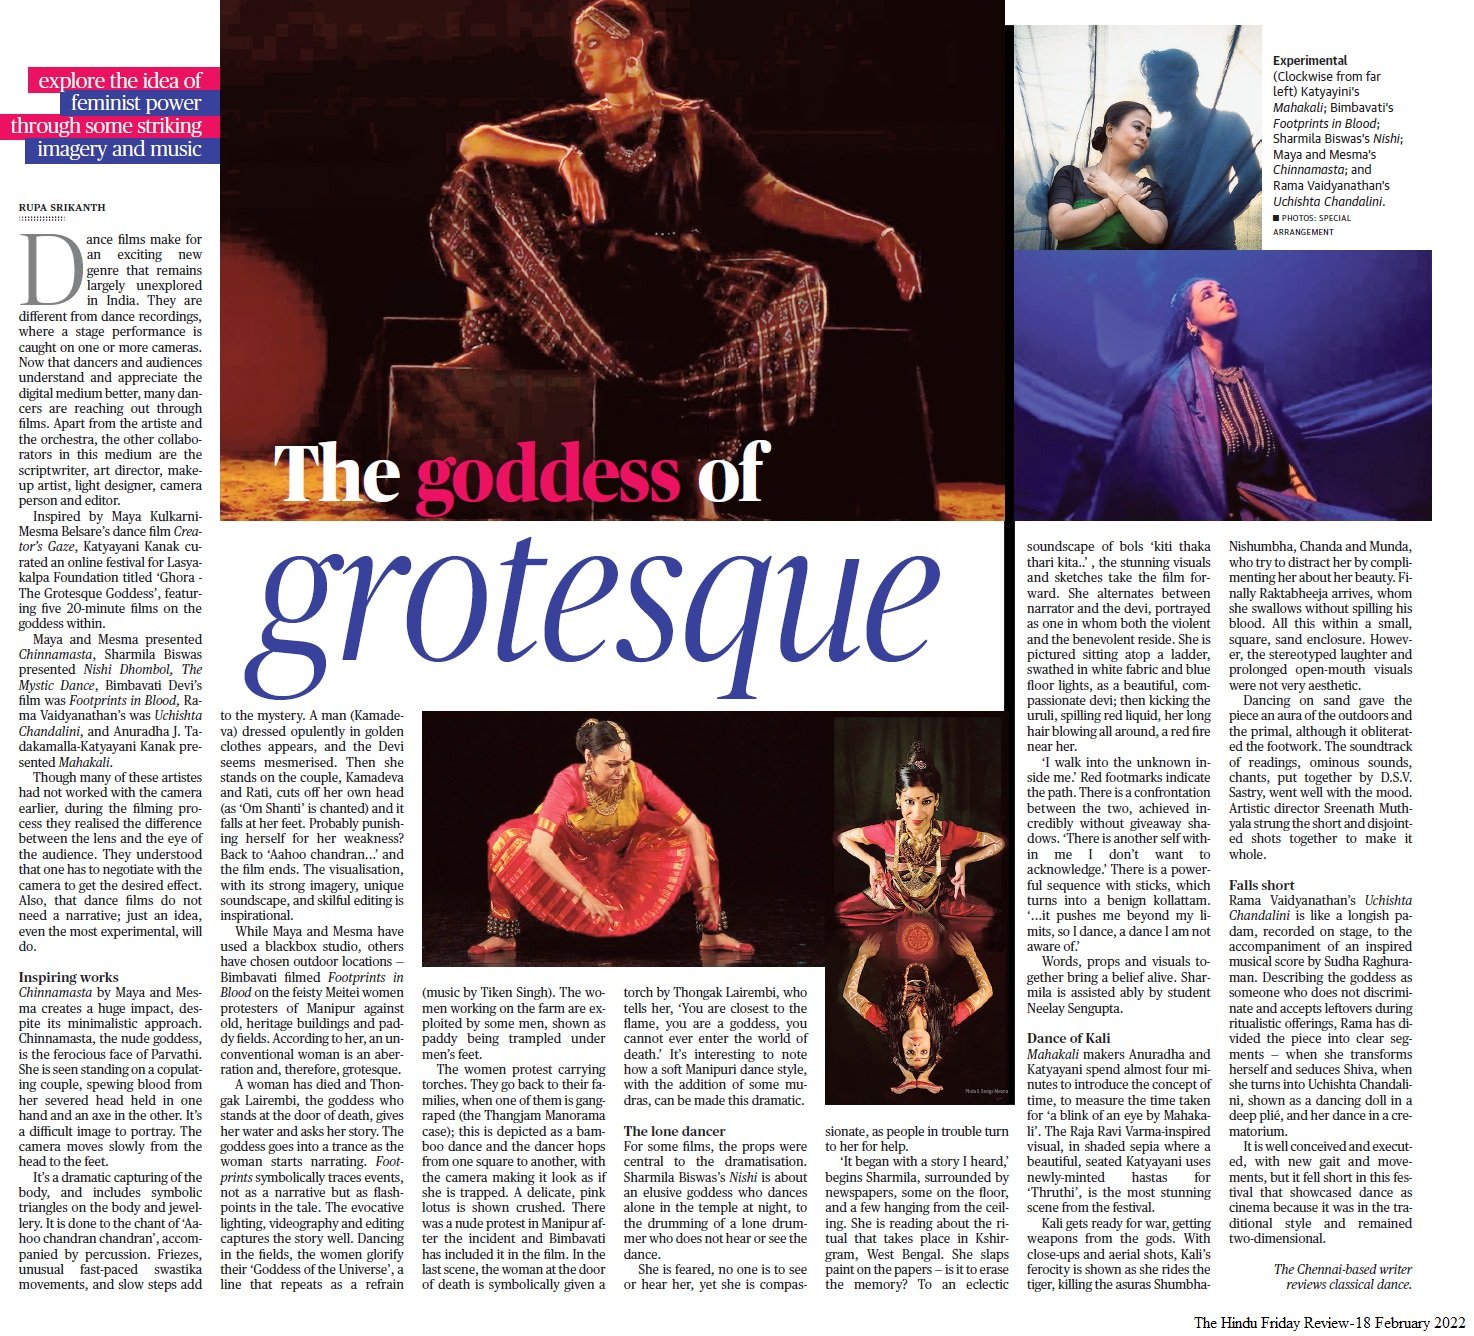 The goddess of grotesque - Rupa Srikanth